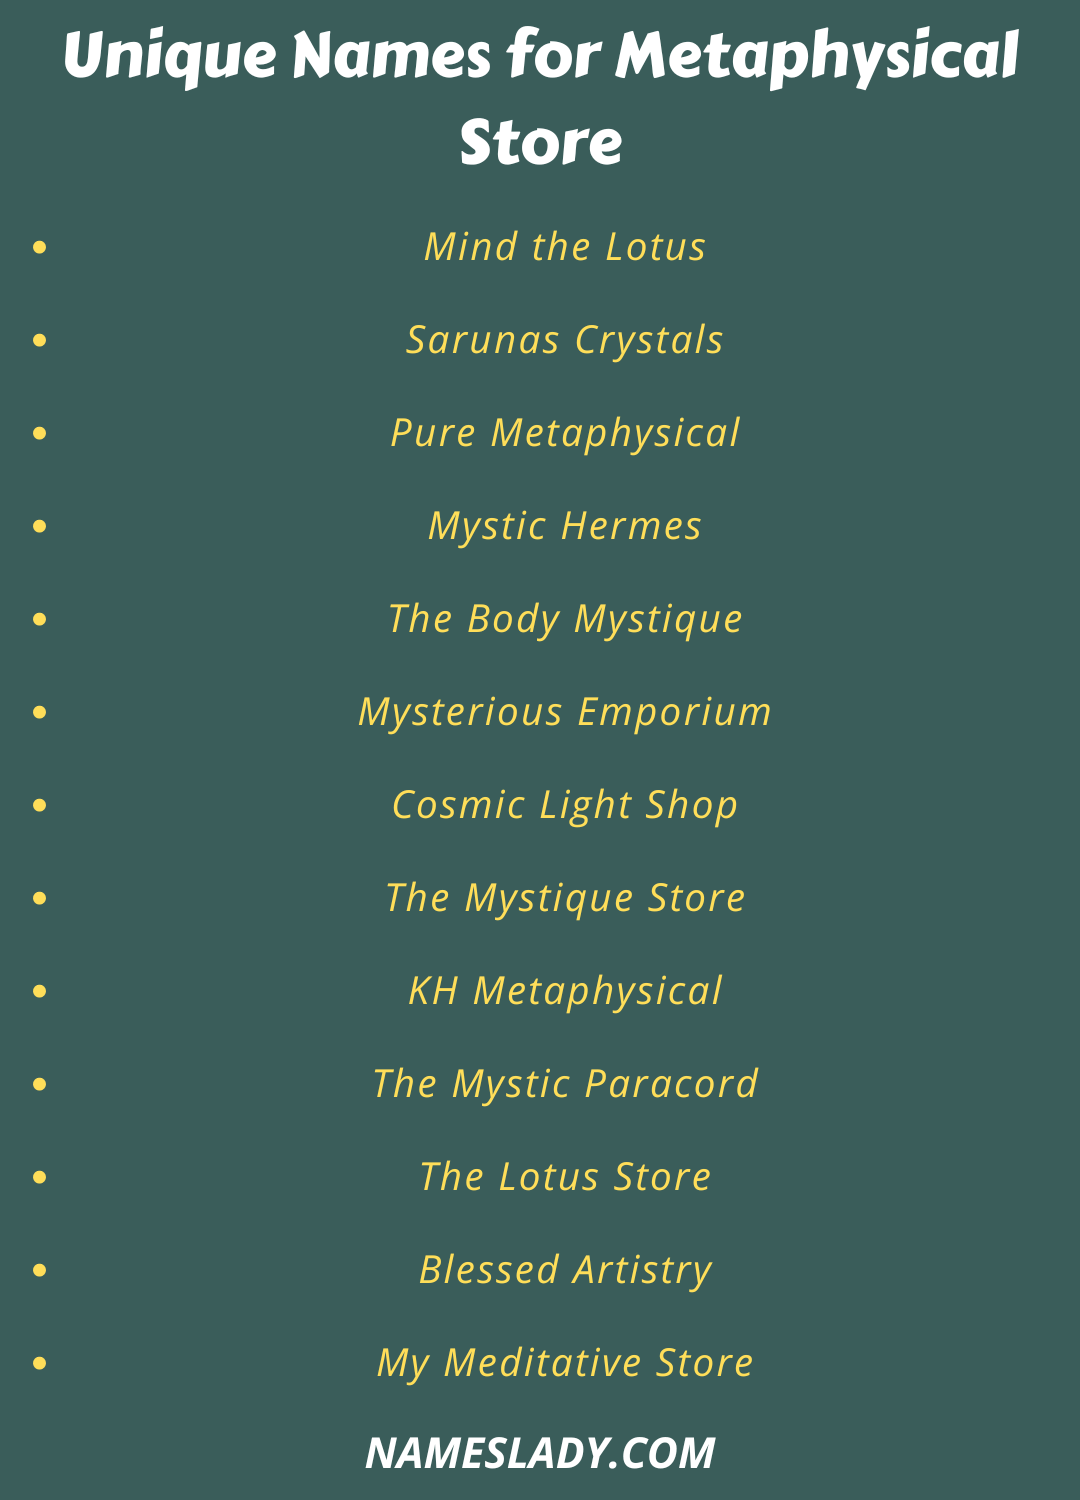 Unique Names for Metaphysical Store